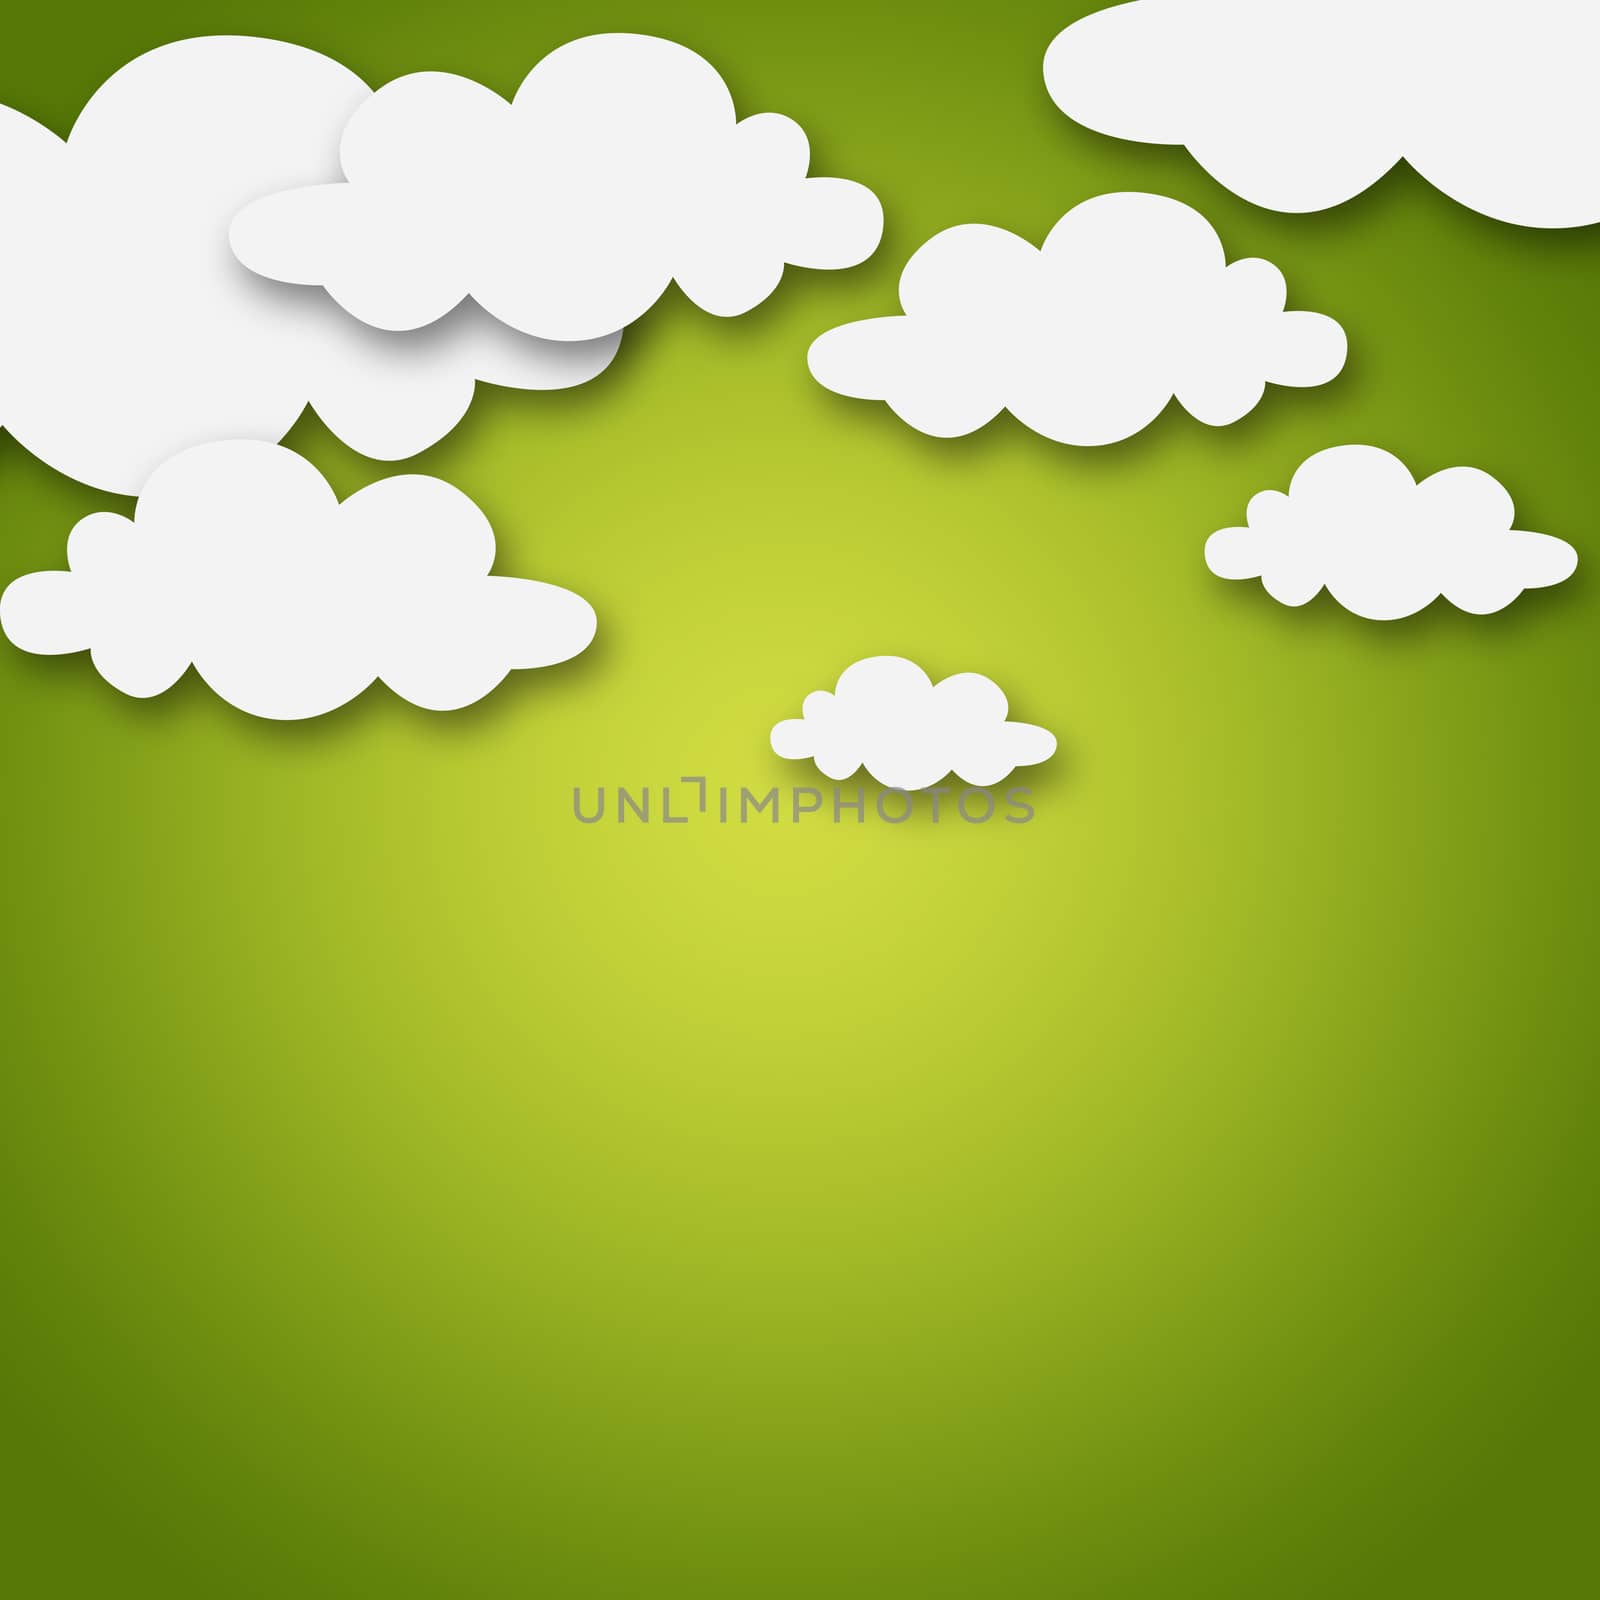 Set of various white clouds on yellow background